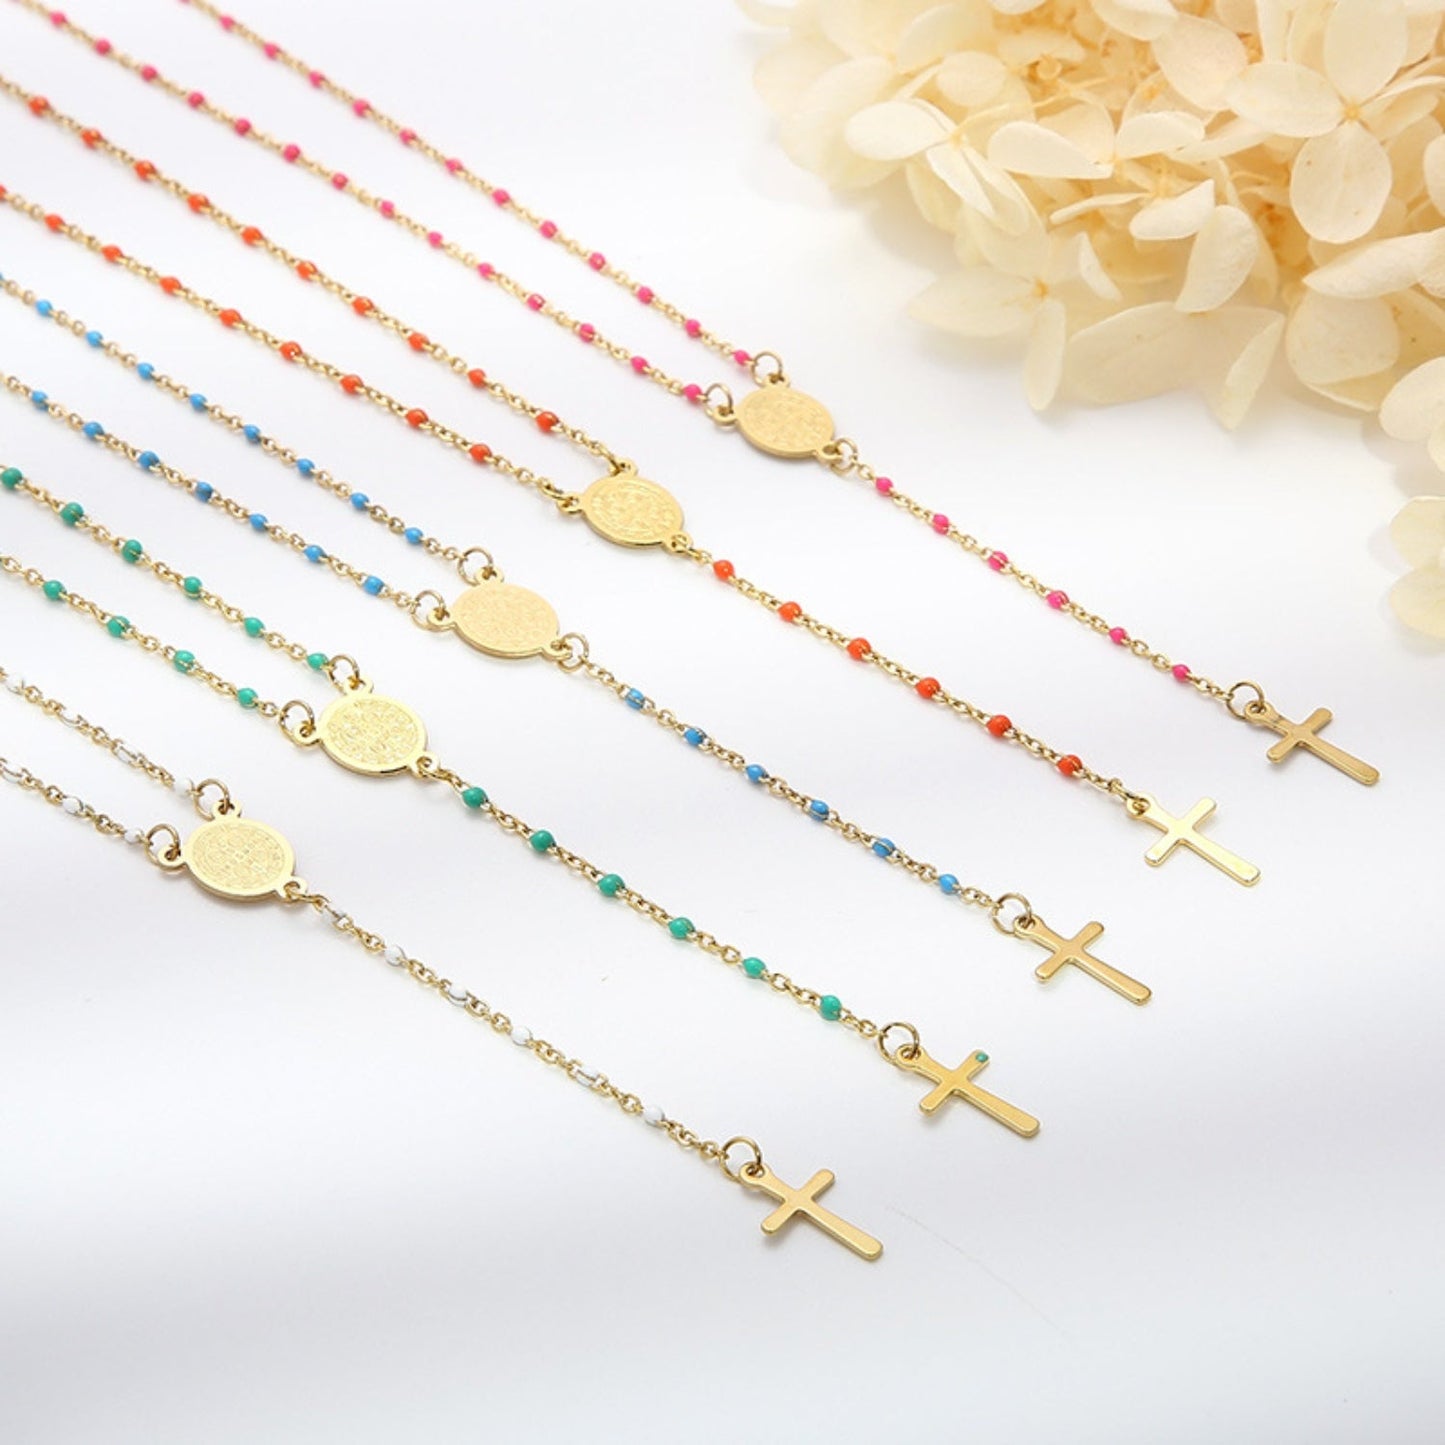 Stainless Steel Beaded Cross Necklace - OMG! Rose